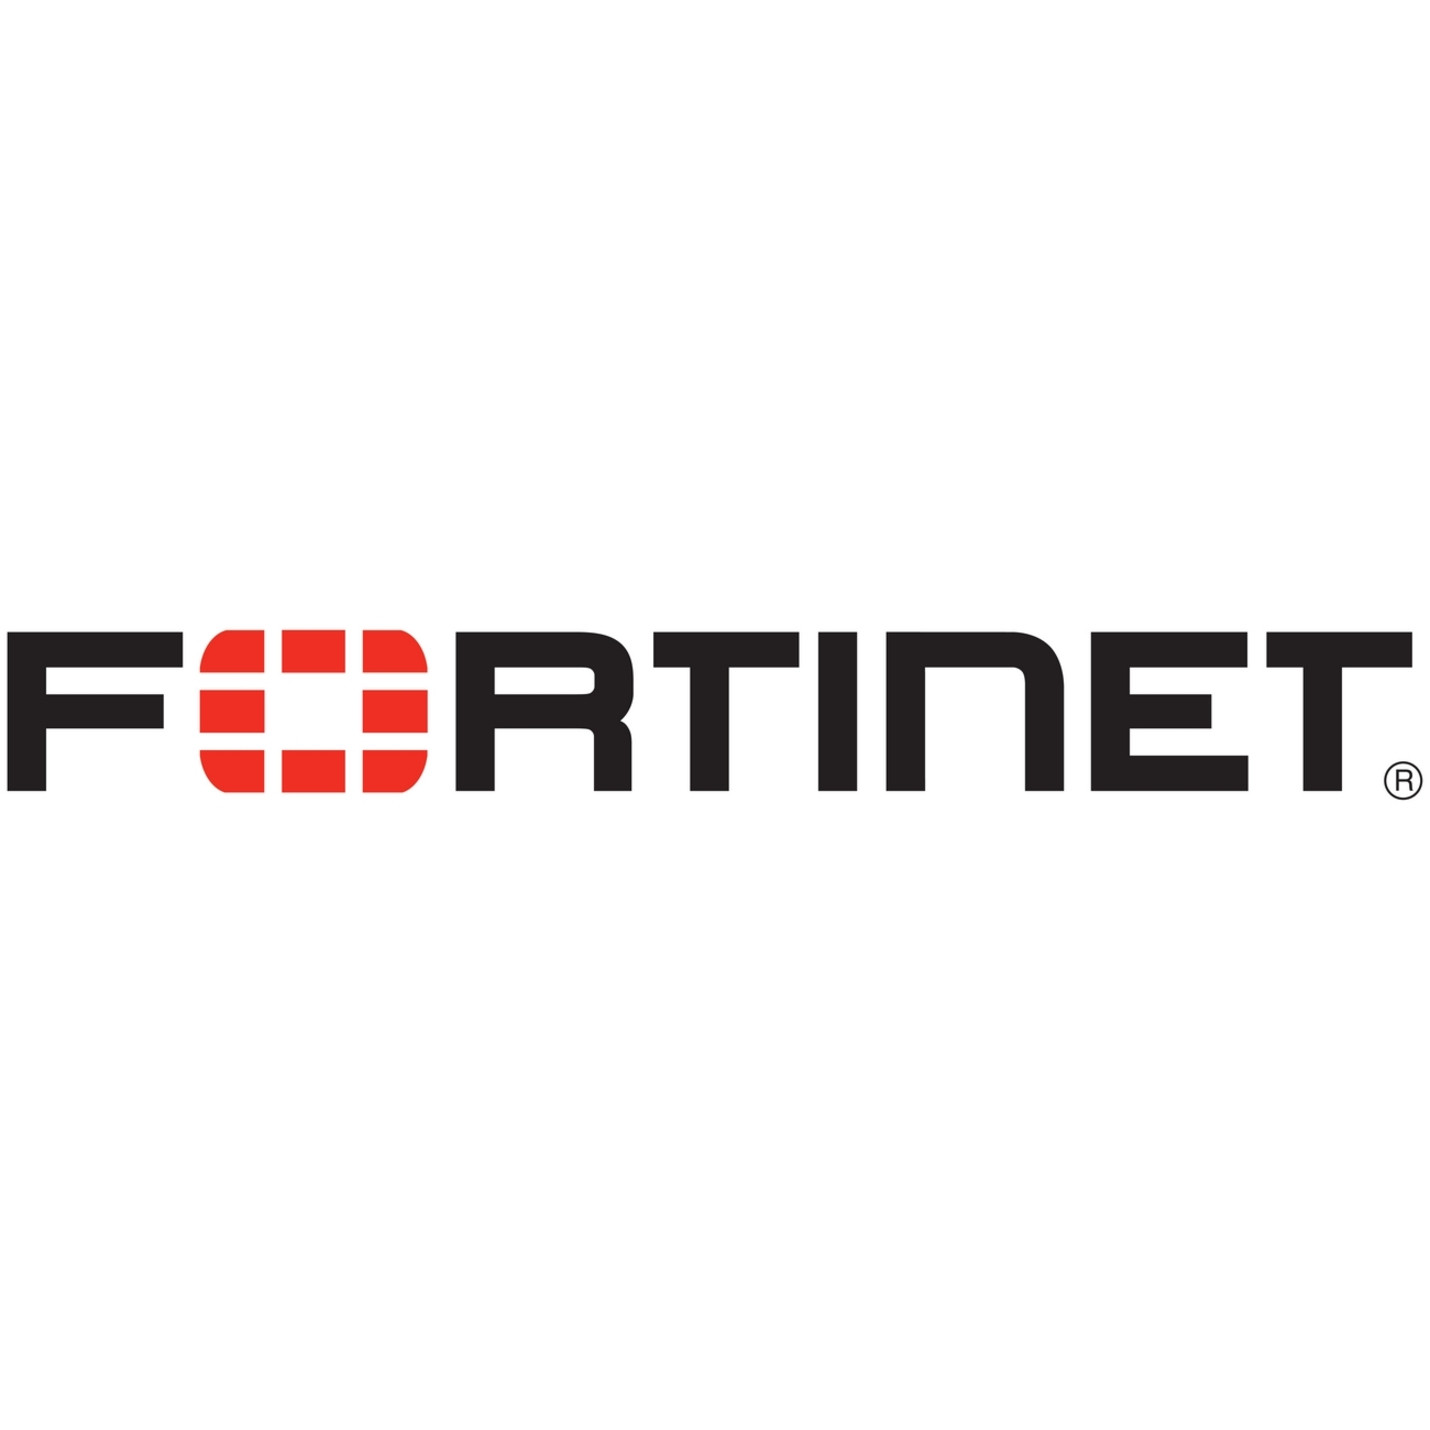 Fortinet AP1020e IEEE 802.11n 300 Mbit/s Wireless Access Point2.40 GHz, 5 GHzMIMO Technology1 x Network (RJ-45)Ethernet, Fast Ethern… AP1020E